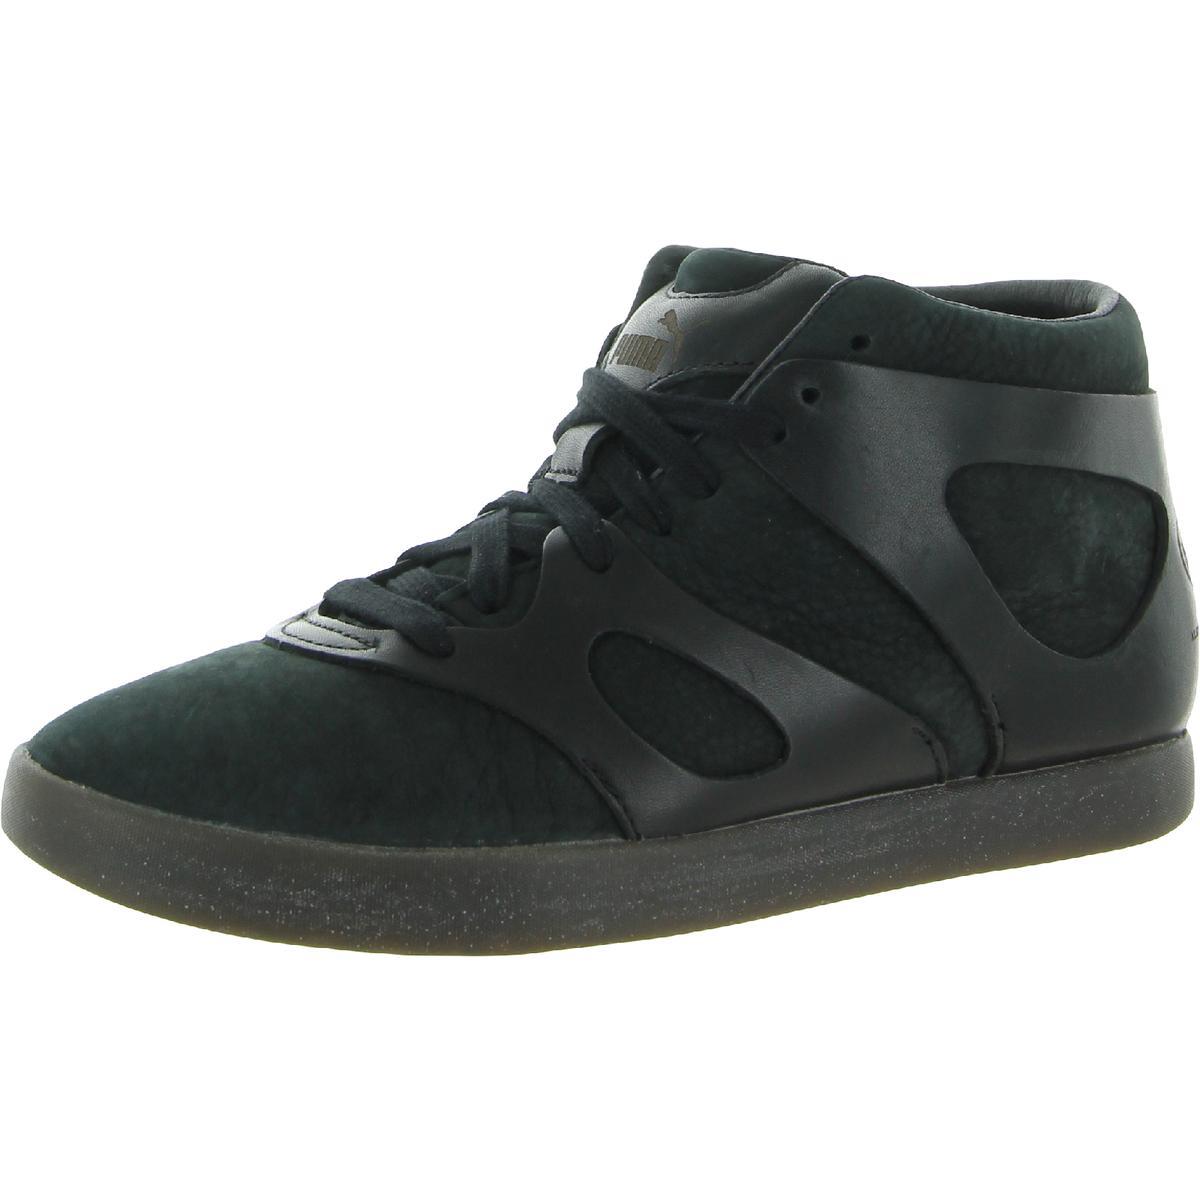 Puma Womens Mcqueen Climb Leather Casual and Fashion Sneakers Shoes Bhfo 2503 Black